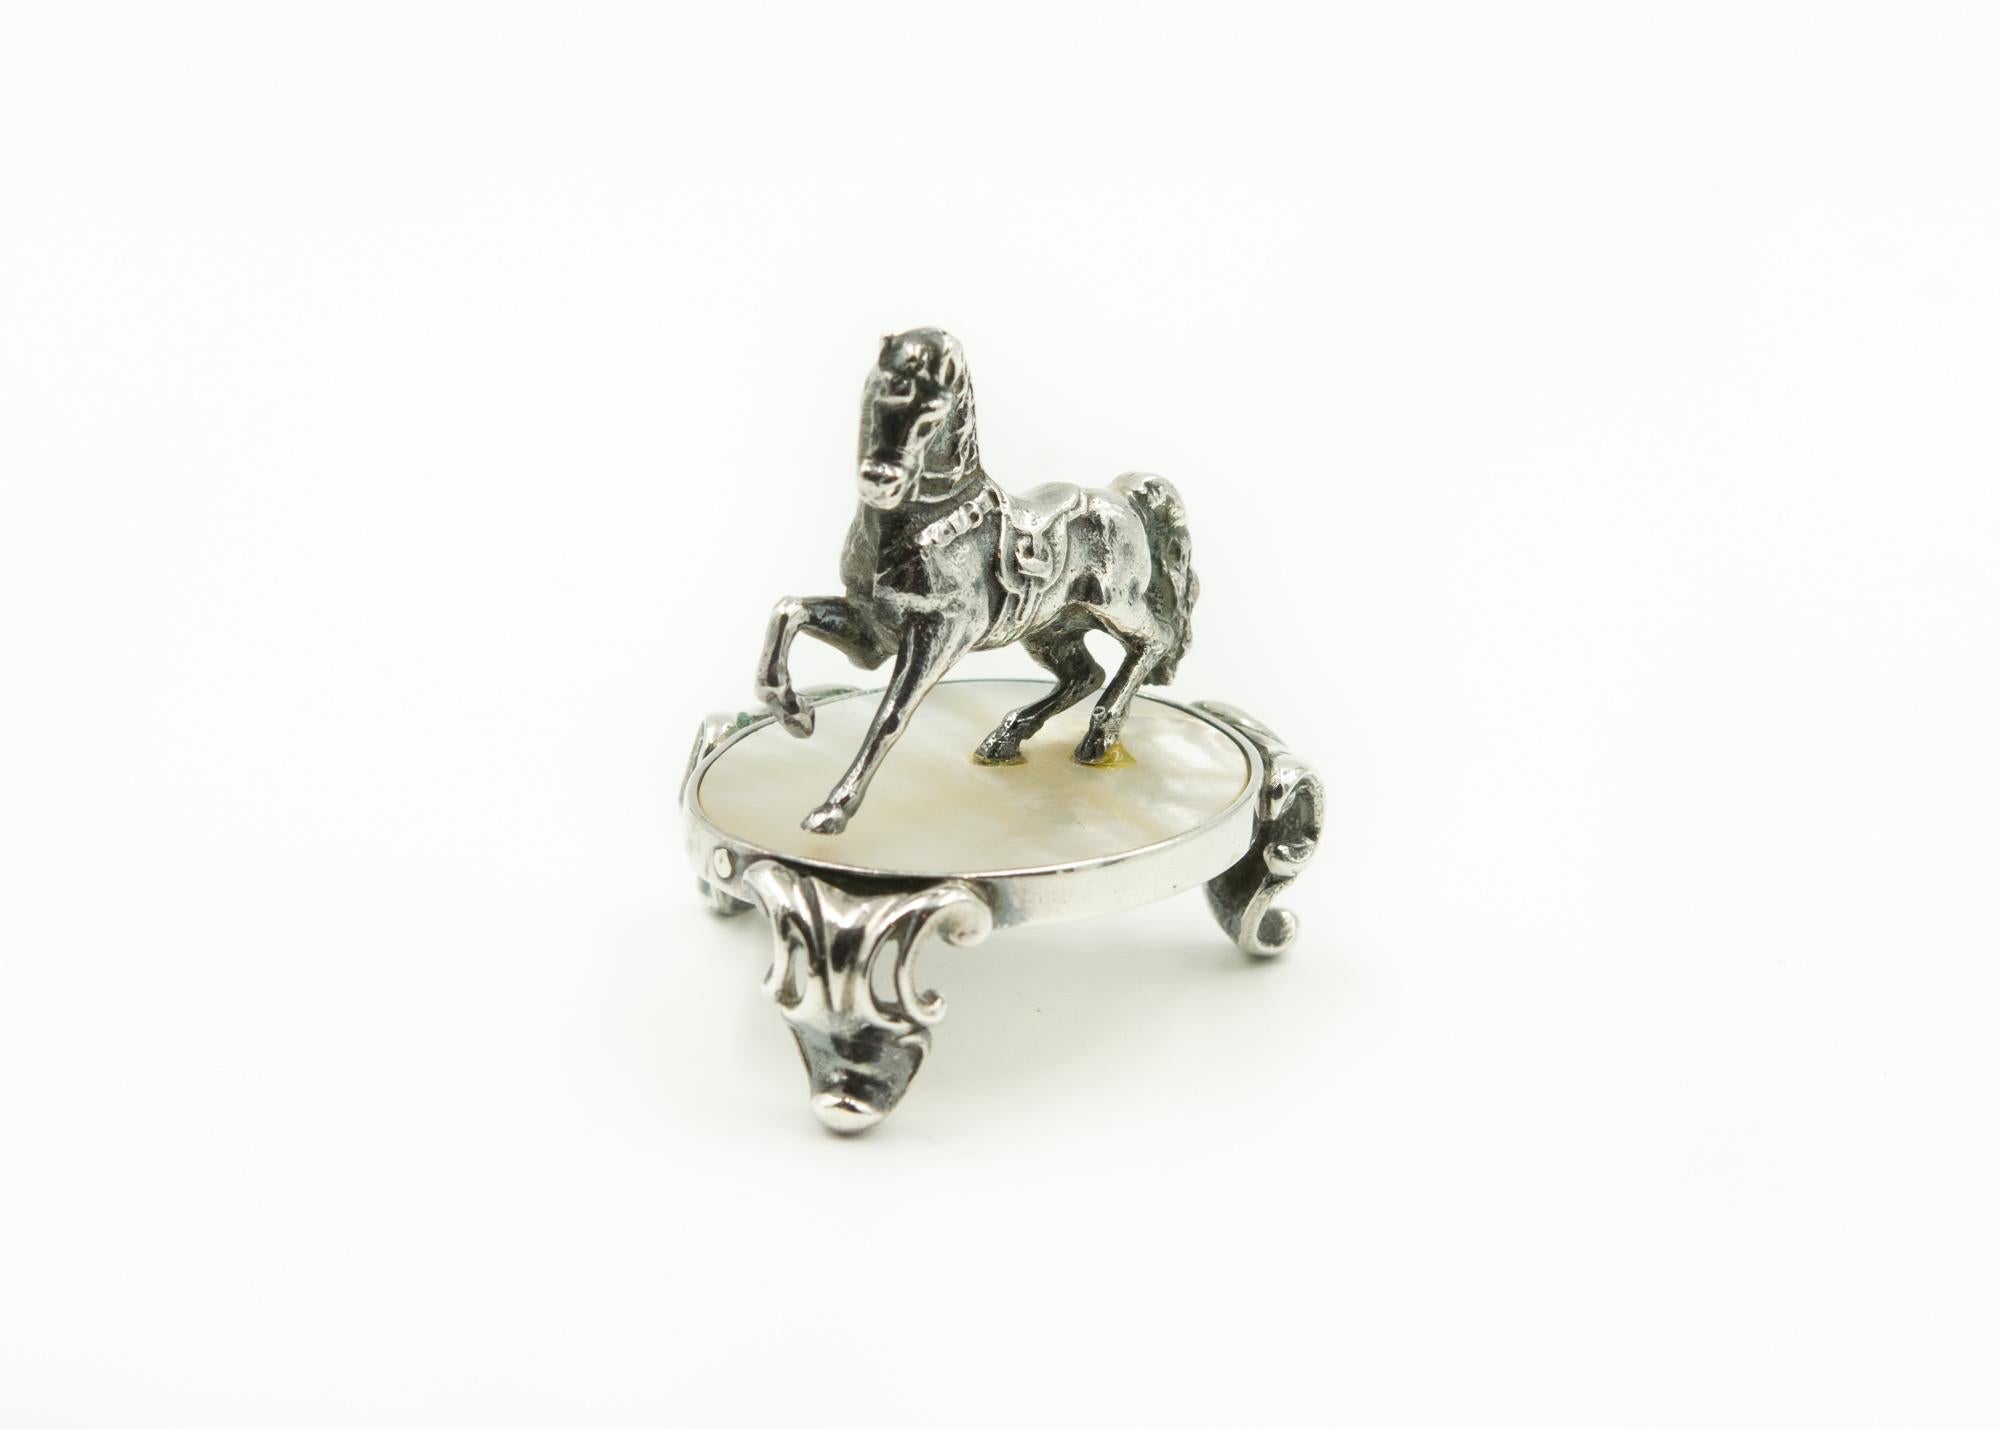 Originally Watrous made bells and iron nickel-plated toys, this is a rare example of one of his horses done in sterling silver. The horse is fitted with a saddle and bridle and looks like he or she is pracing on a sliver of mother of pearl stand